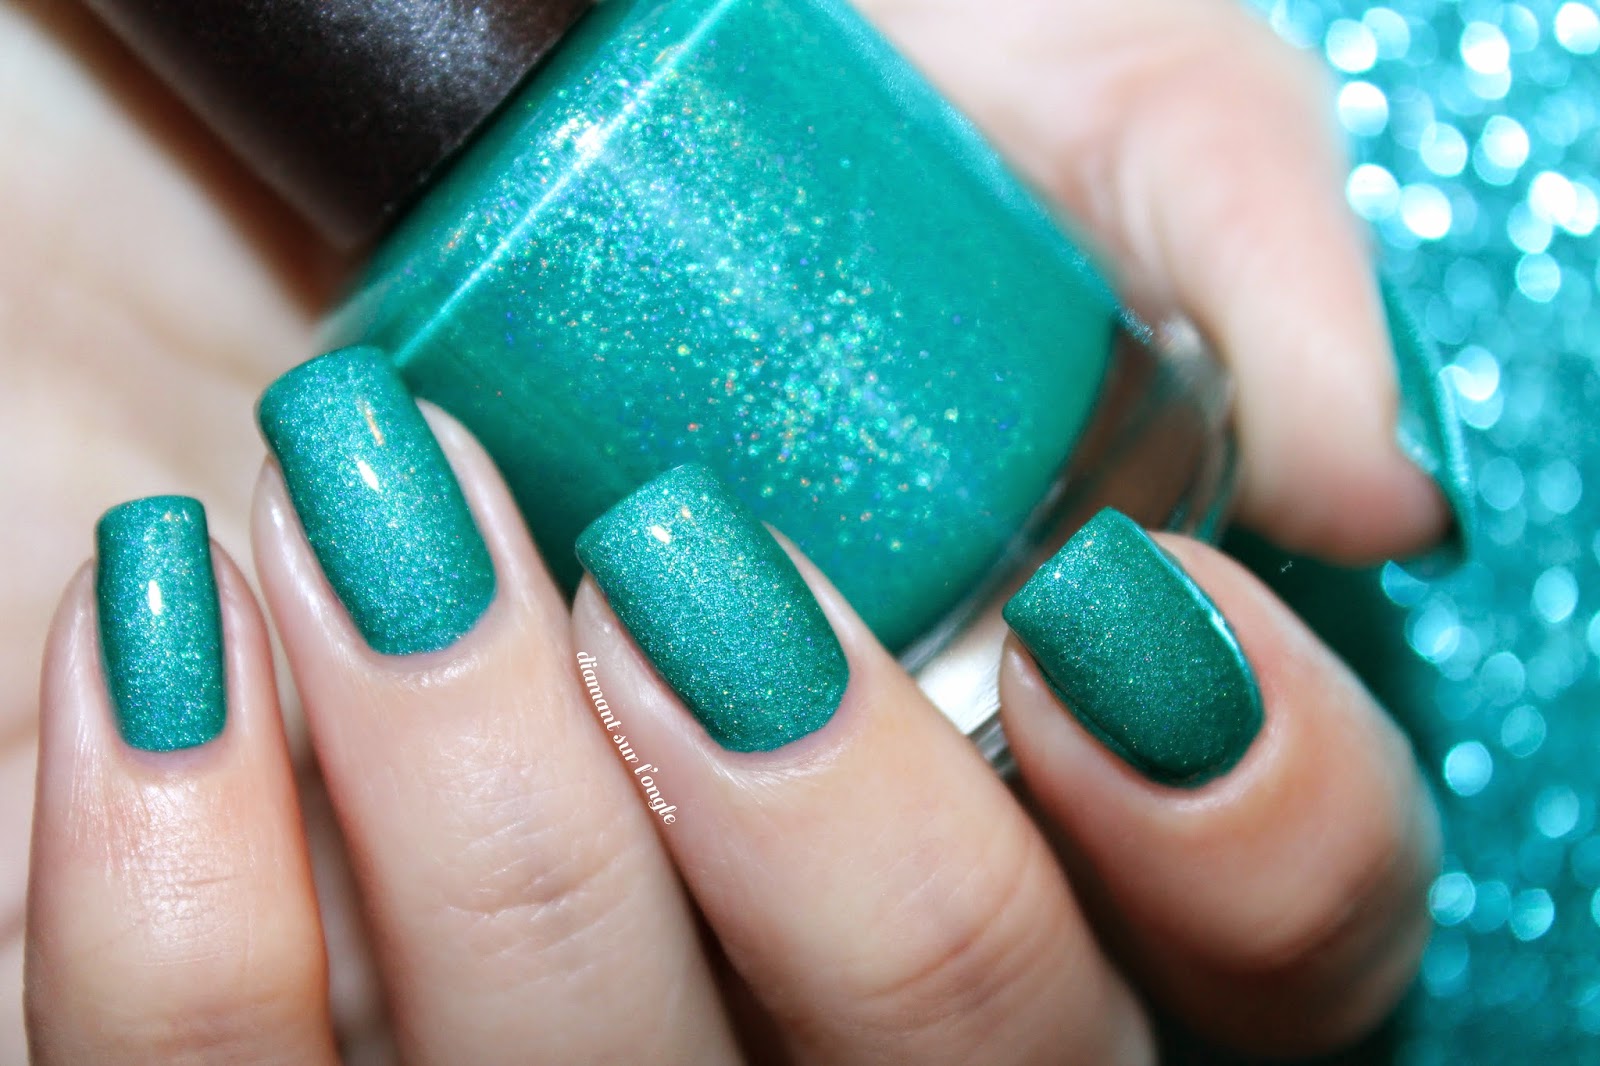 Swatch of Temp-tealtion from Lilypad Lacquer